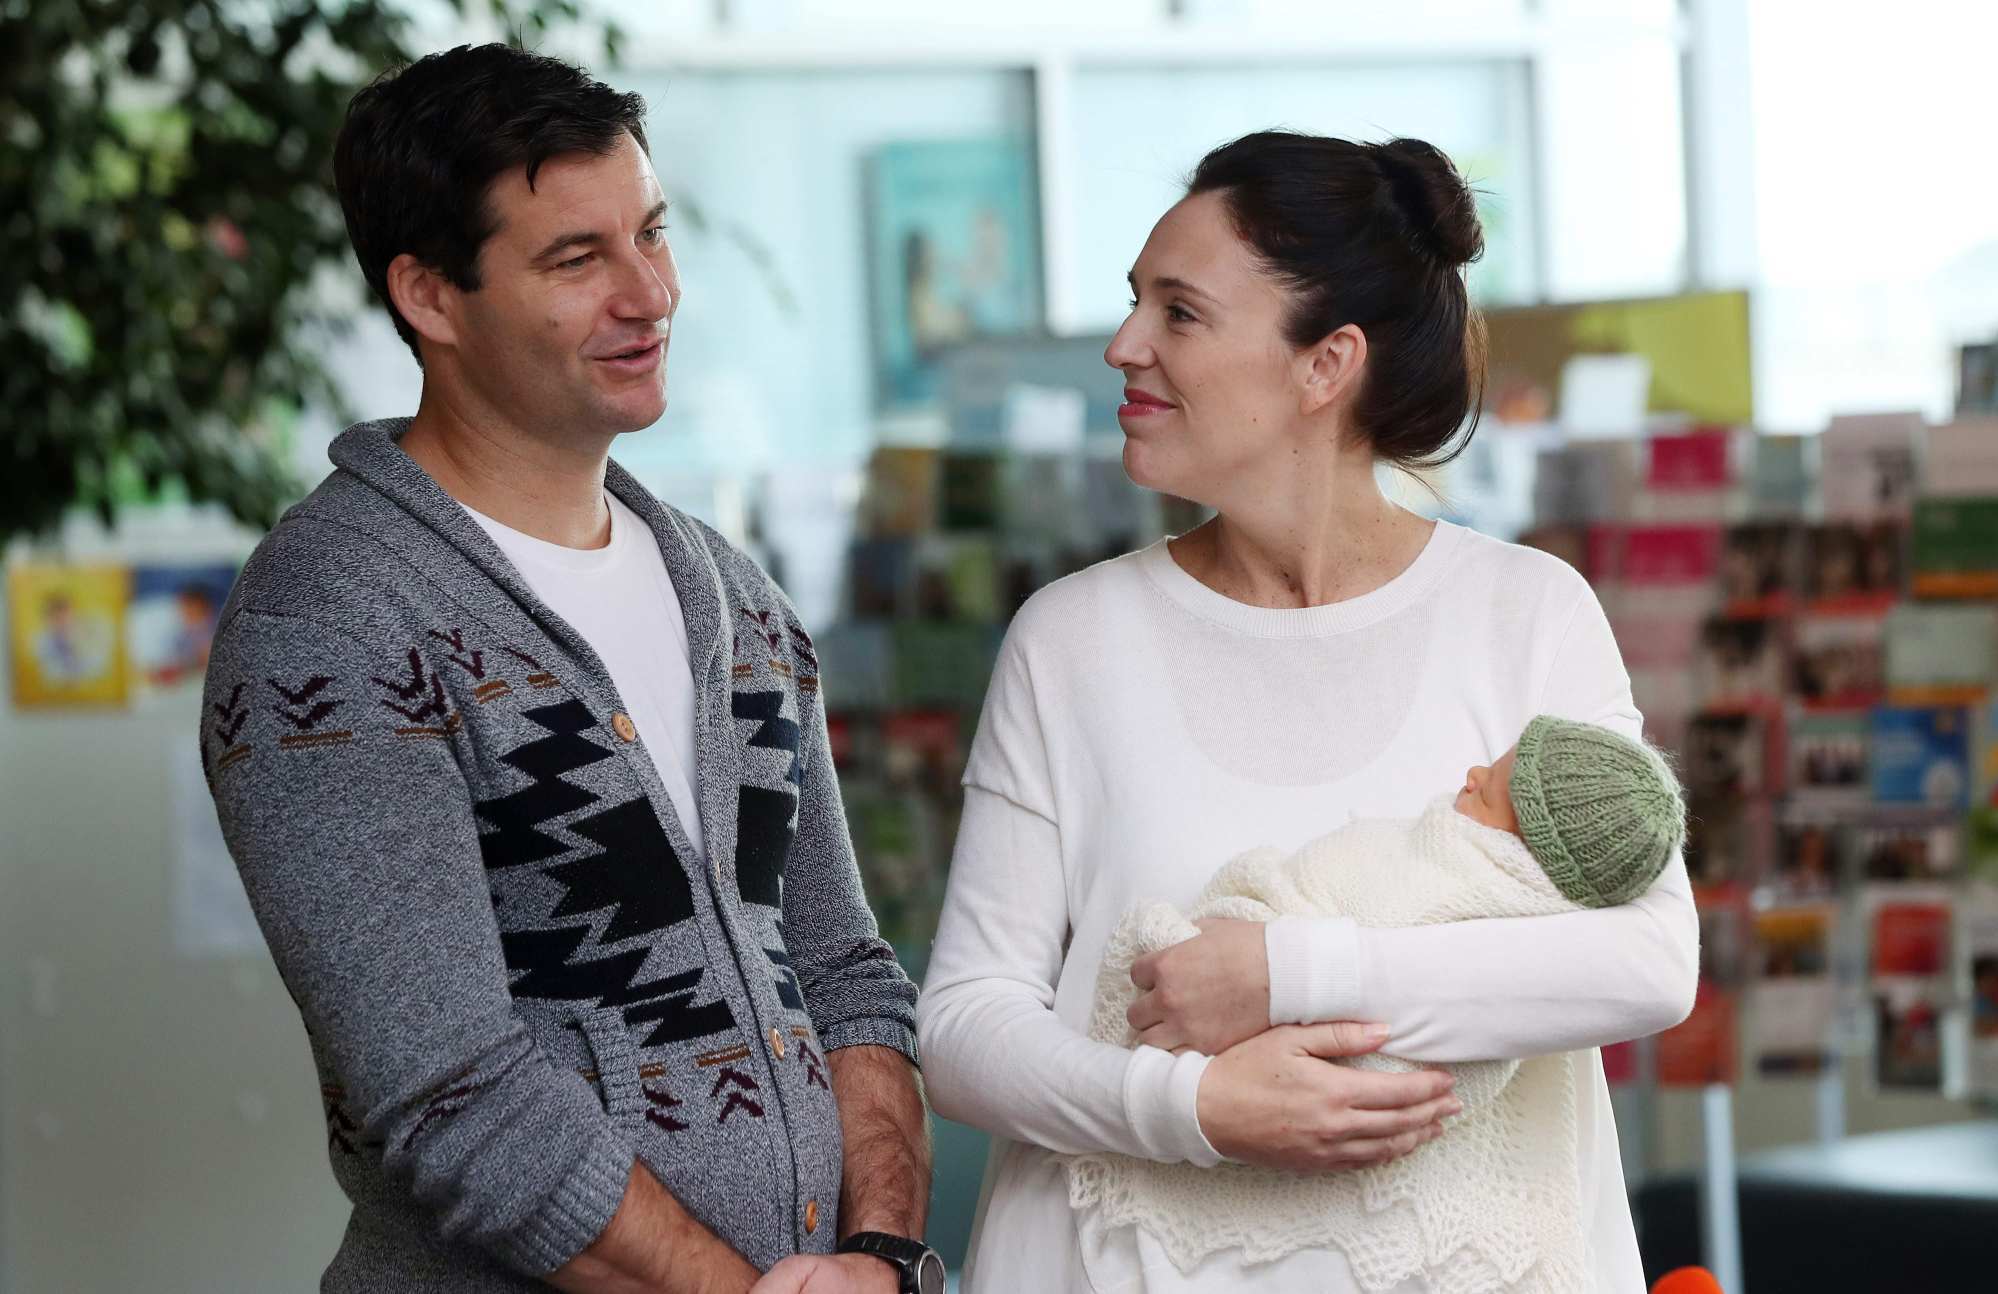 New Zealand Prime Minister Jacinda Ardern and her partner Clarke Gayford pose with their baby daughter Neve. Photo: AFP